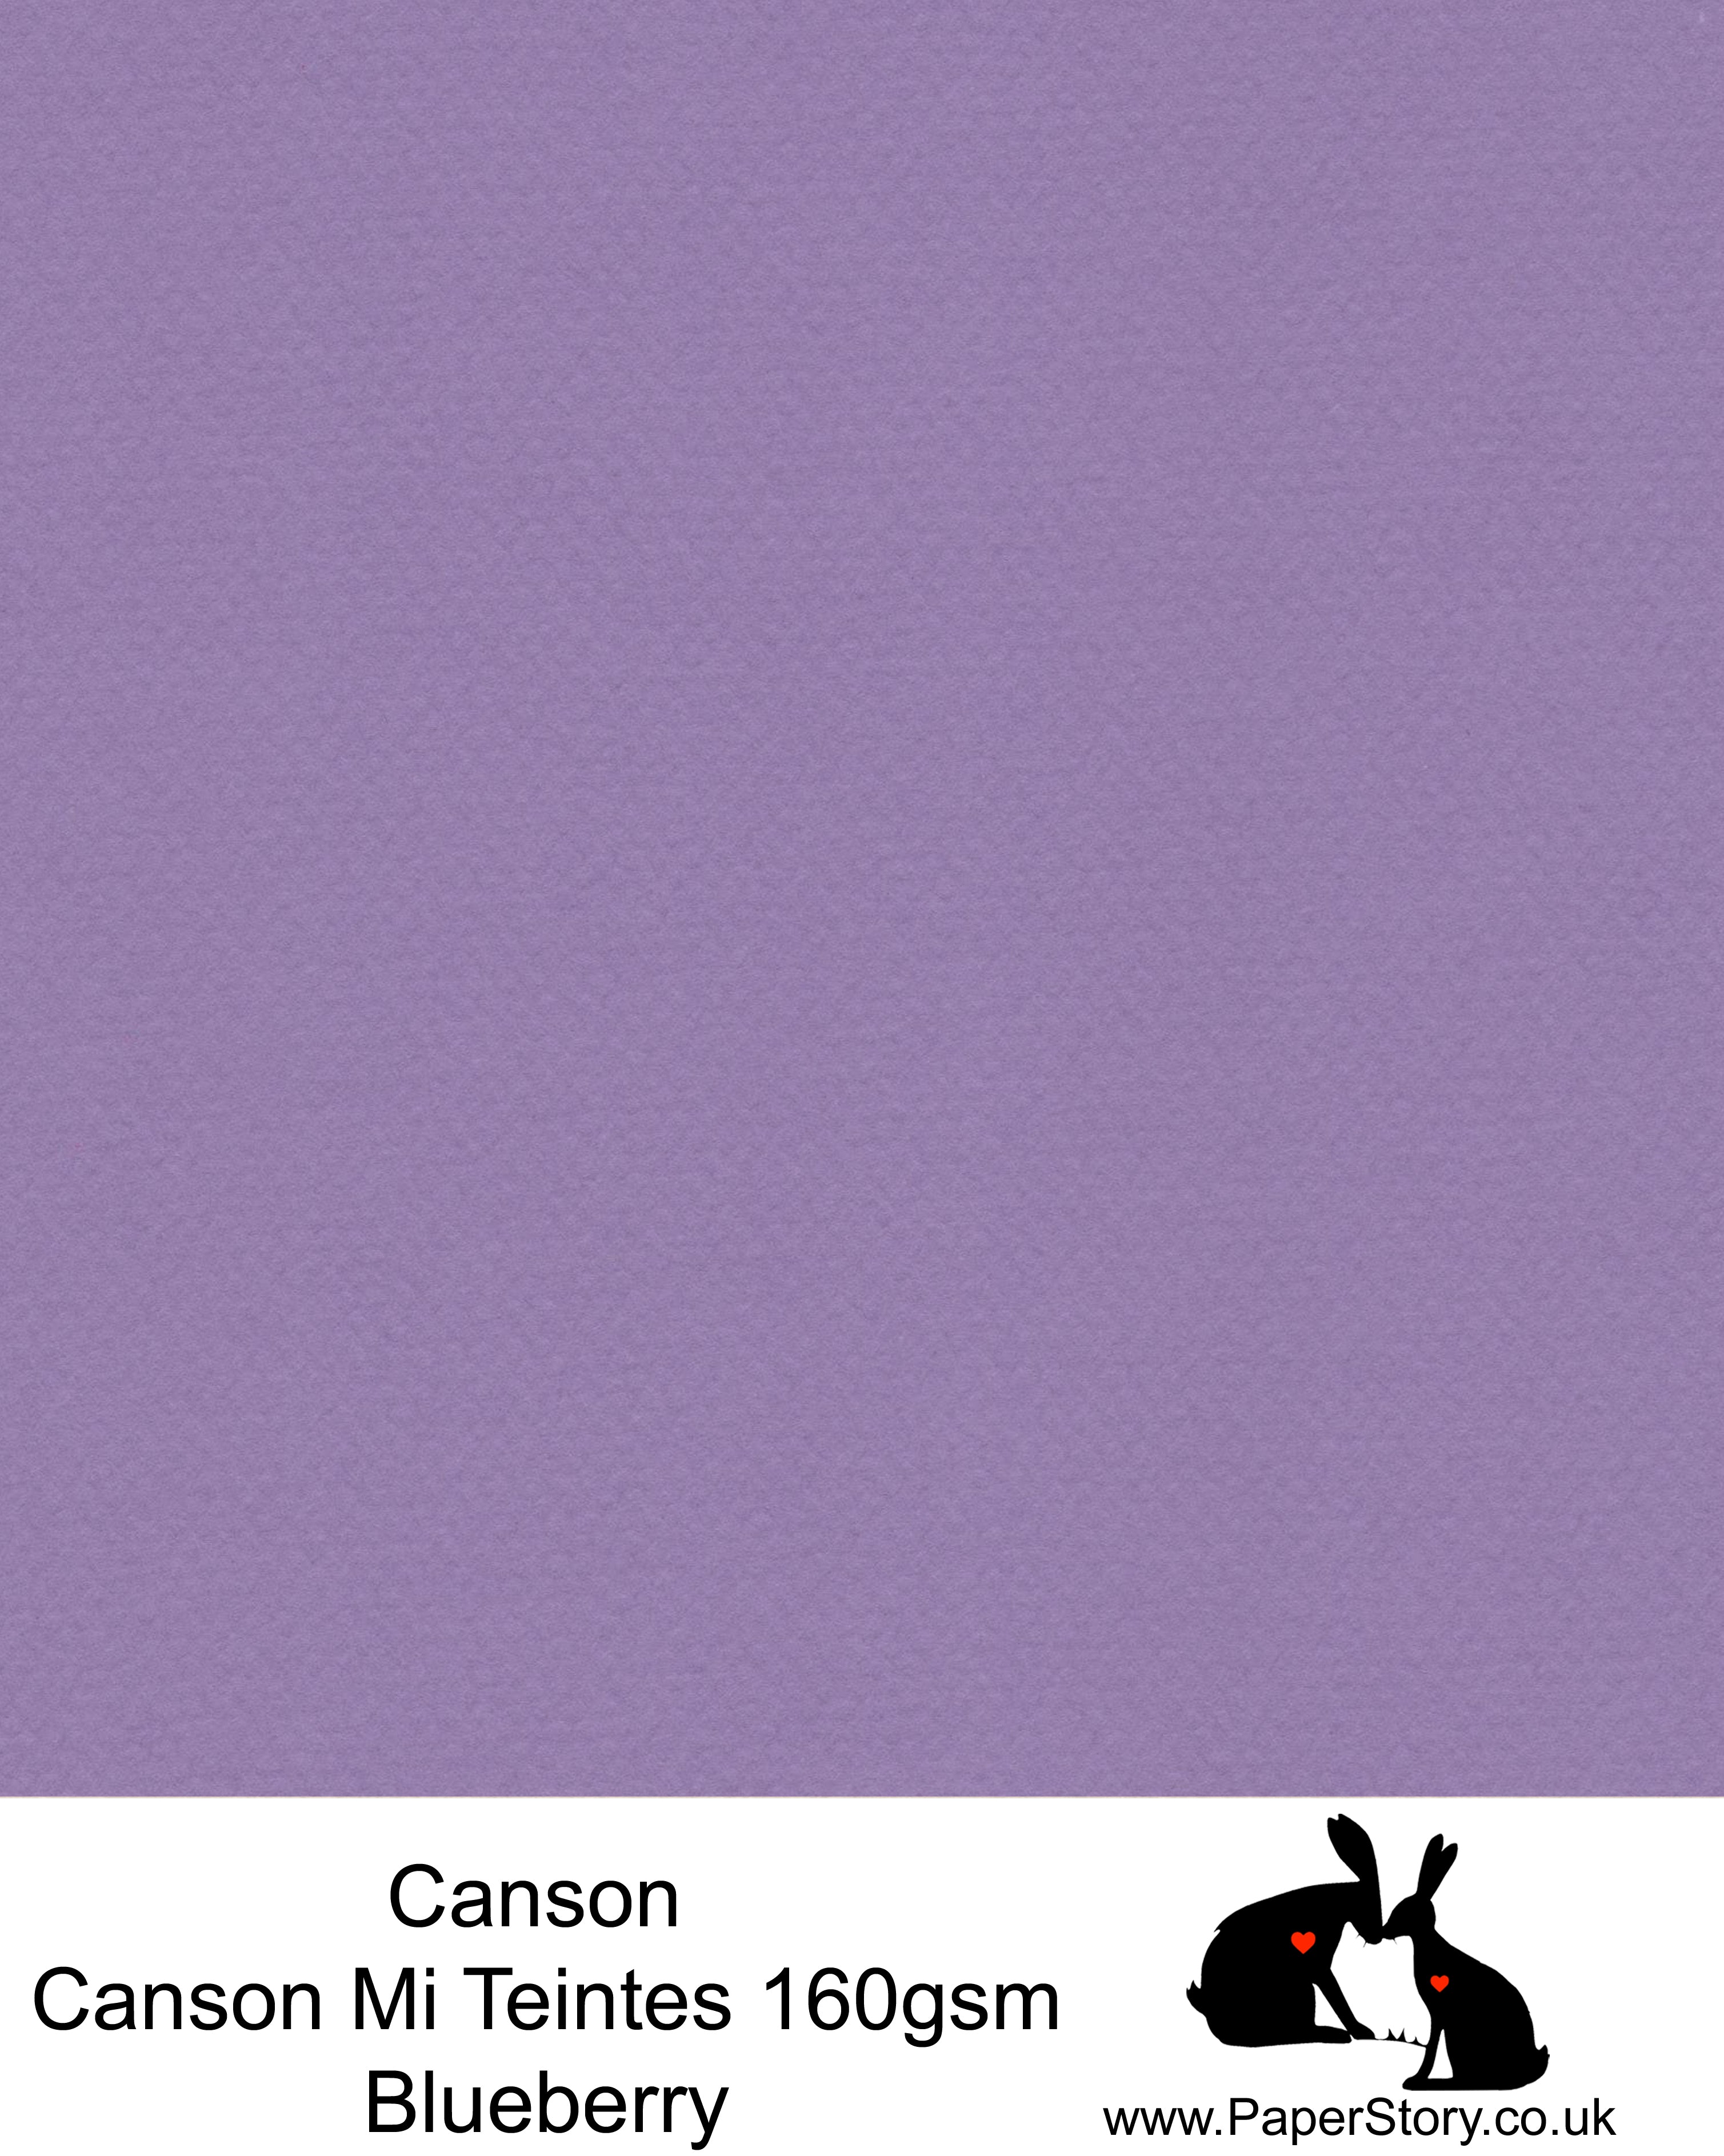 Canson Mi Teintes acid free, Blueberry purple hammered texture honeycomb surface paper 160 gsm. This is a popular and classic paper for all artists especially well respected for Pastel  and Papercutting made famous by Paper Panda. This paper has a honeycombed finish one side and fine grain the other. An authentic art paper, acid free with a  very high 50% cotton content. Canson Mi-Teintes complies with the ISO 9706 standard on permanence, a guarantee of excellent conservation  